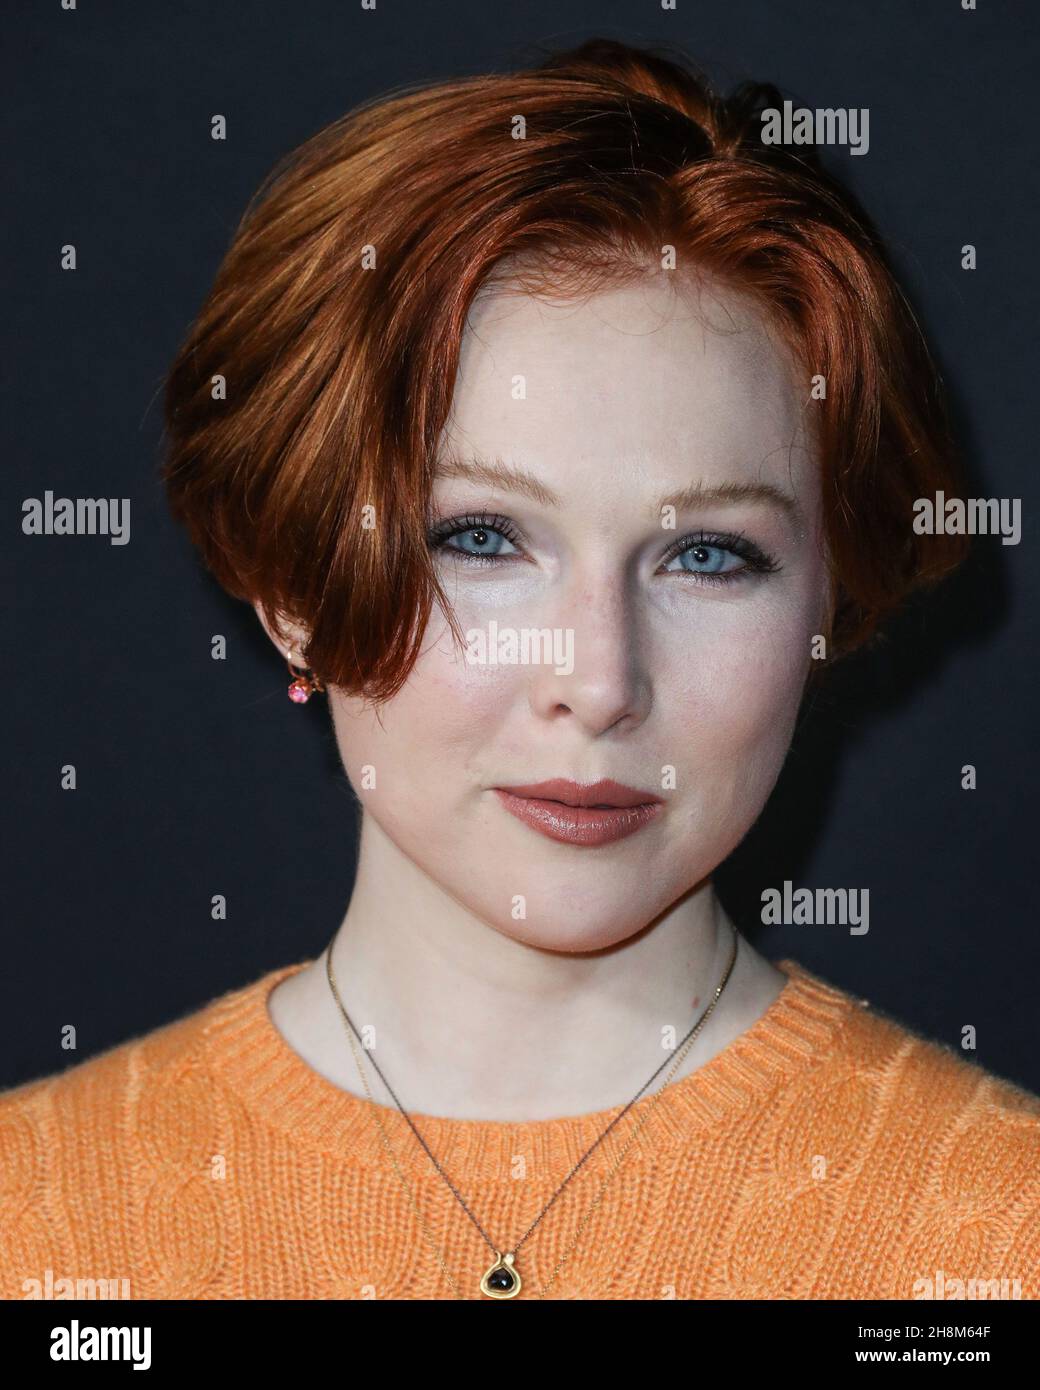 Los Angeles, United States. 30th Nov, 2021. LOS ANGELES, CALIFORNIA, USA - NOVEMBER 30: Actress Molly C. Quinn arrives at the Los Angeles Premiere Of Netflix's 'The Unforgivable' held at the Directors Guild of America Theater on November 30, 2021 in Los Angeles, California, United States. (Photo by Xavier Collin/Image Press Agency) Credit: Image Press Agency/Alamy Live News Stock Photo